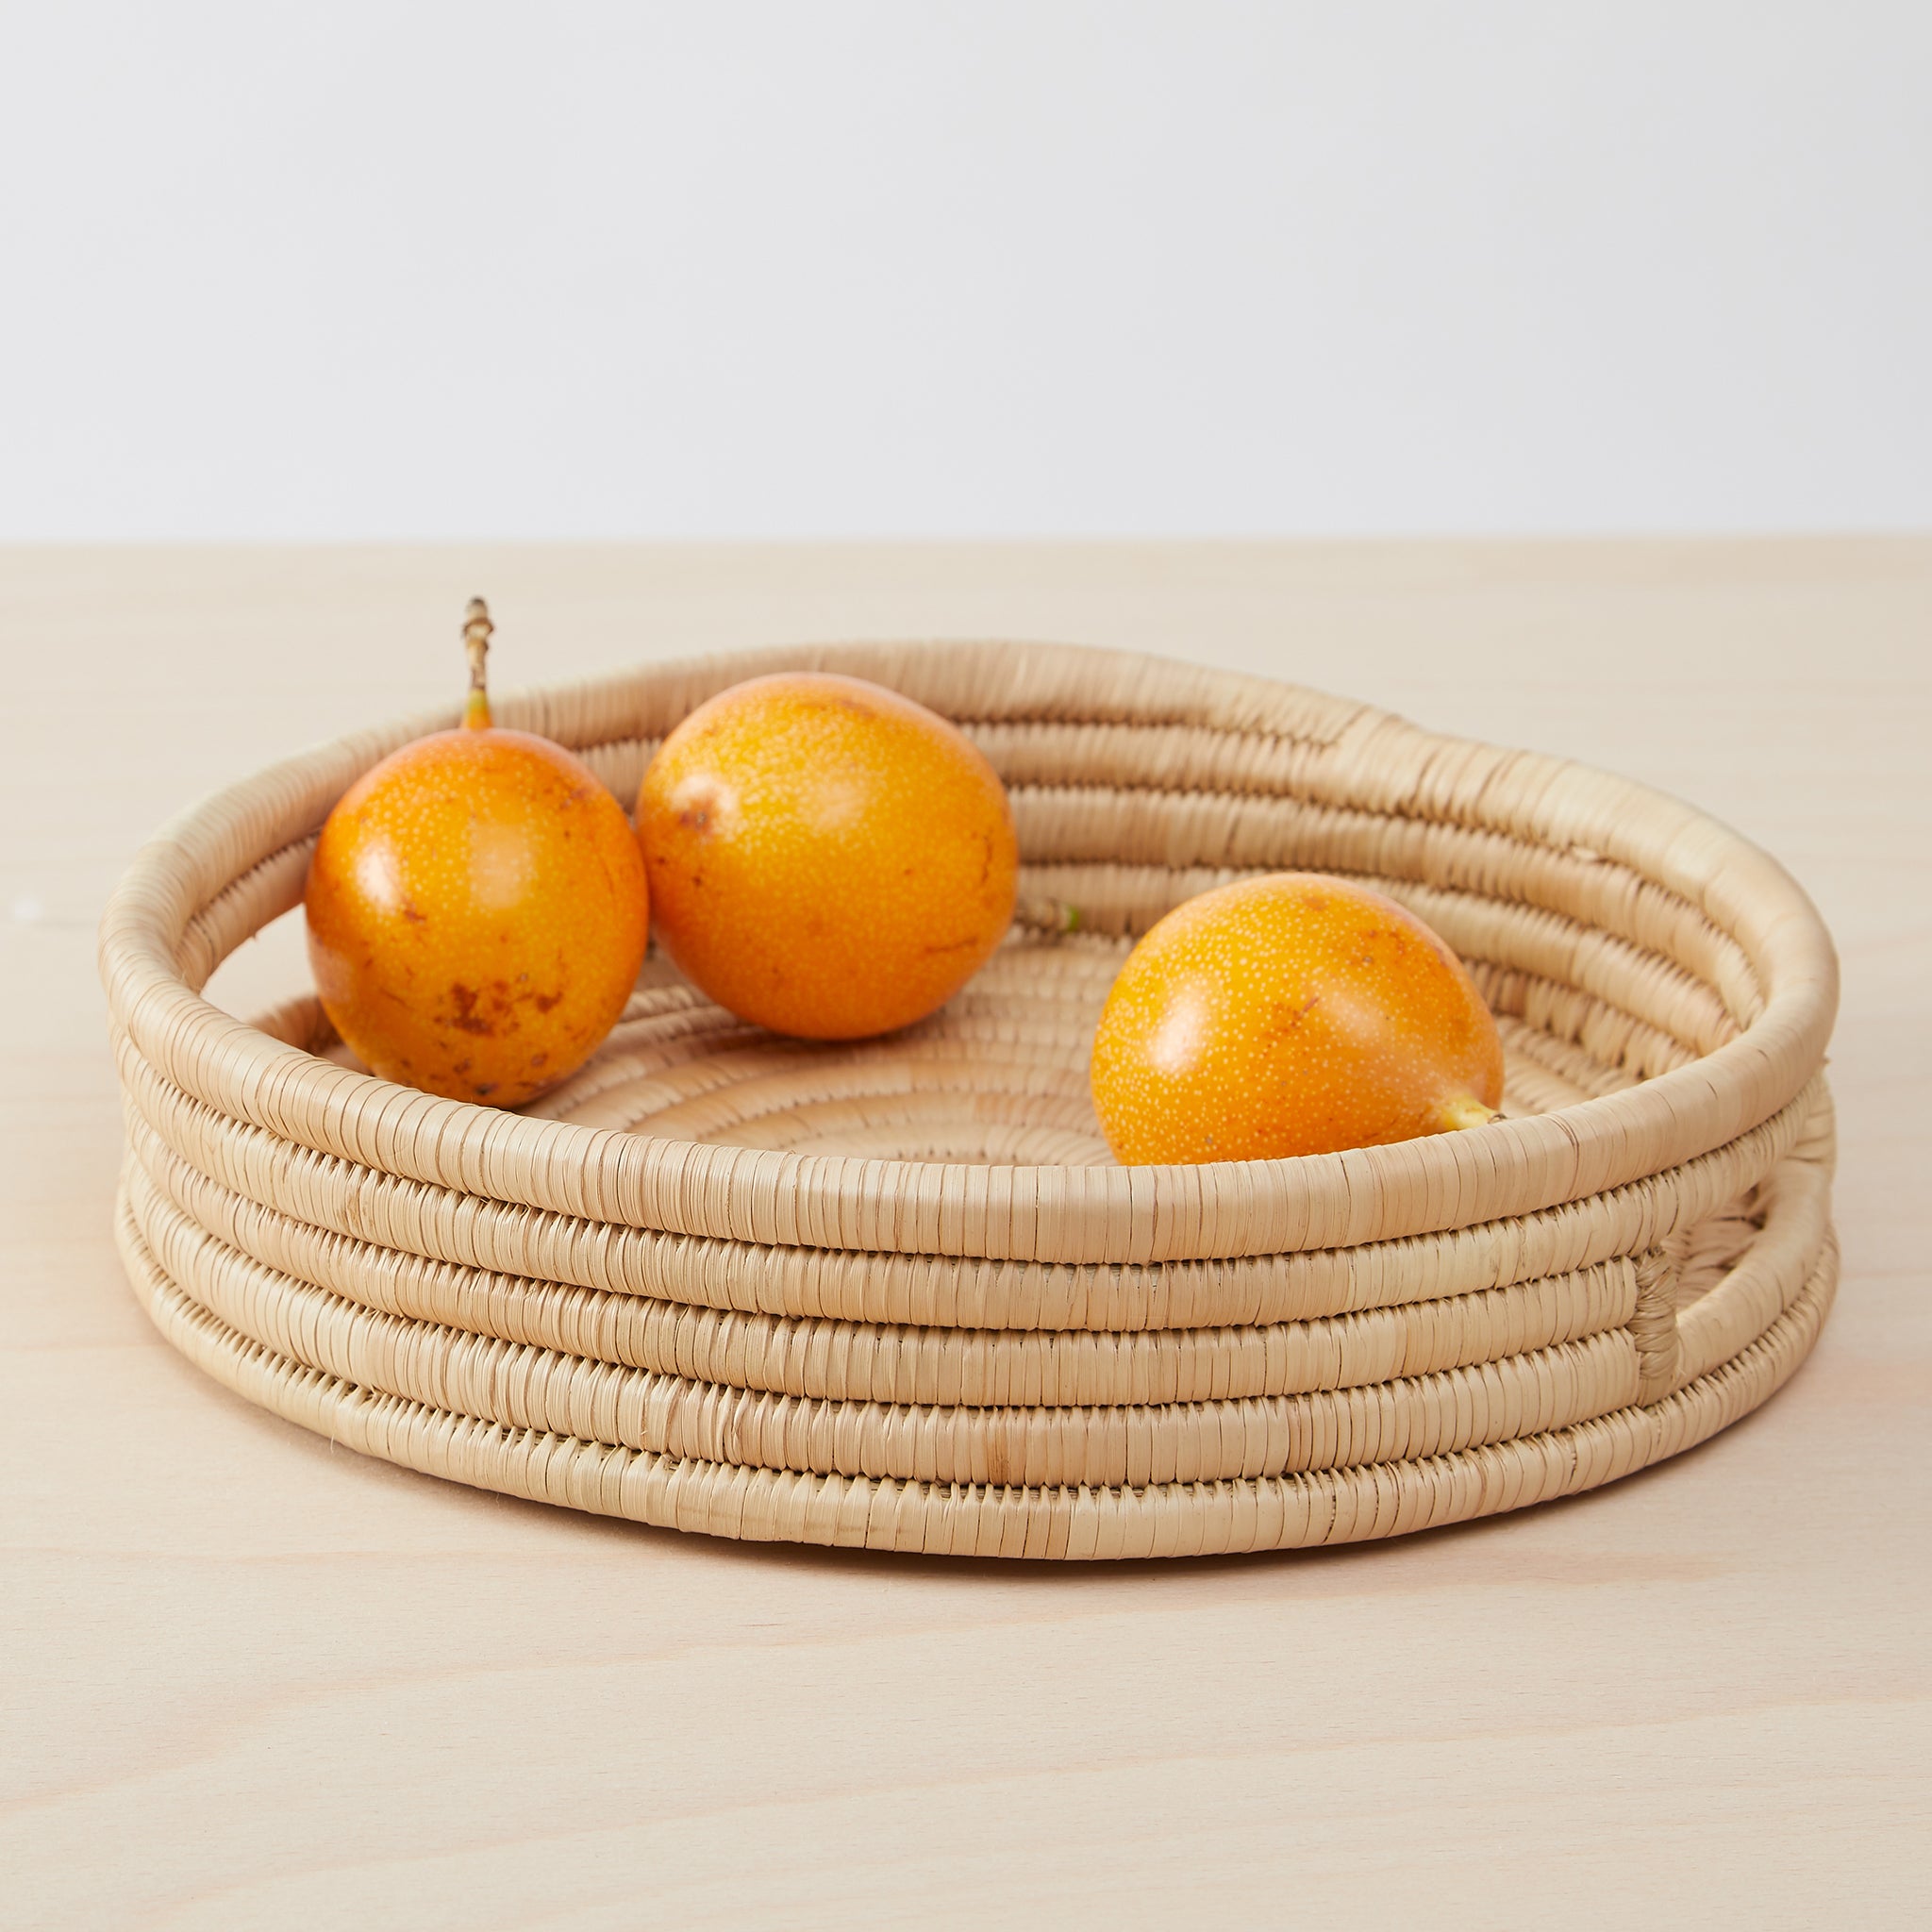 Rustic tray Umi is made of palm leaves in size S.